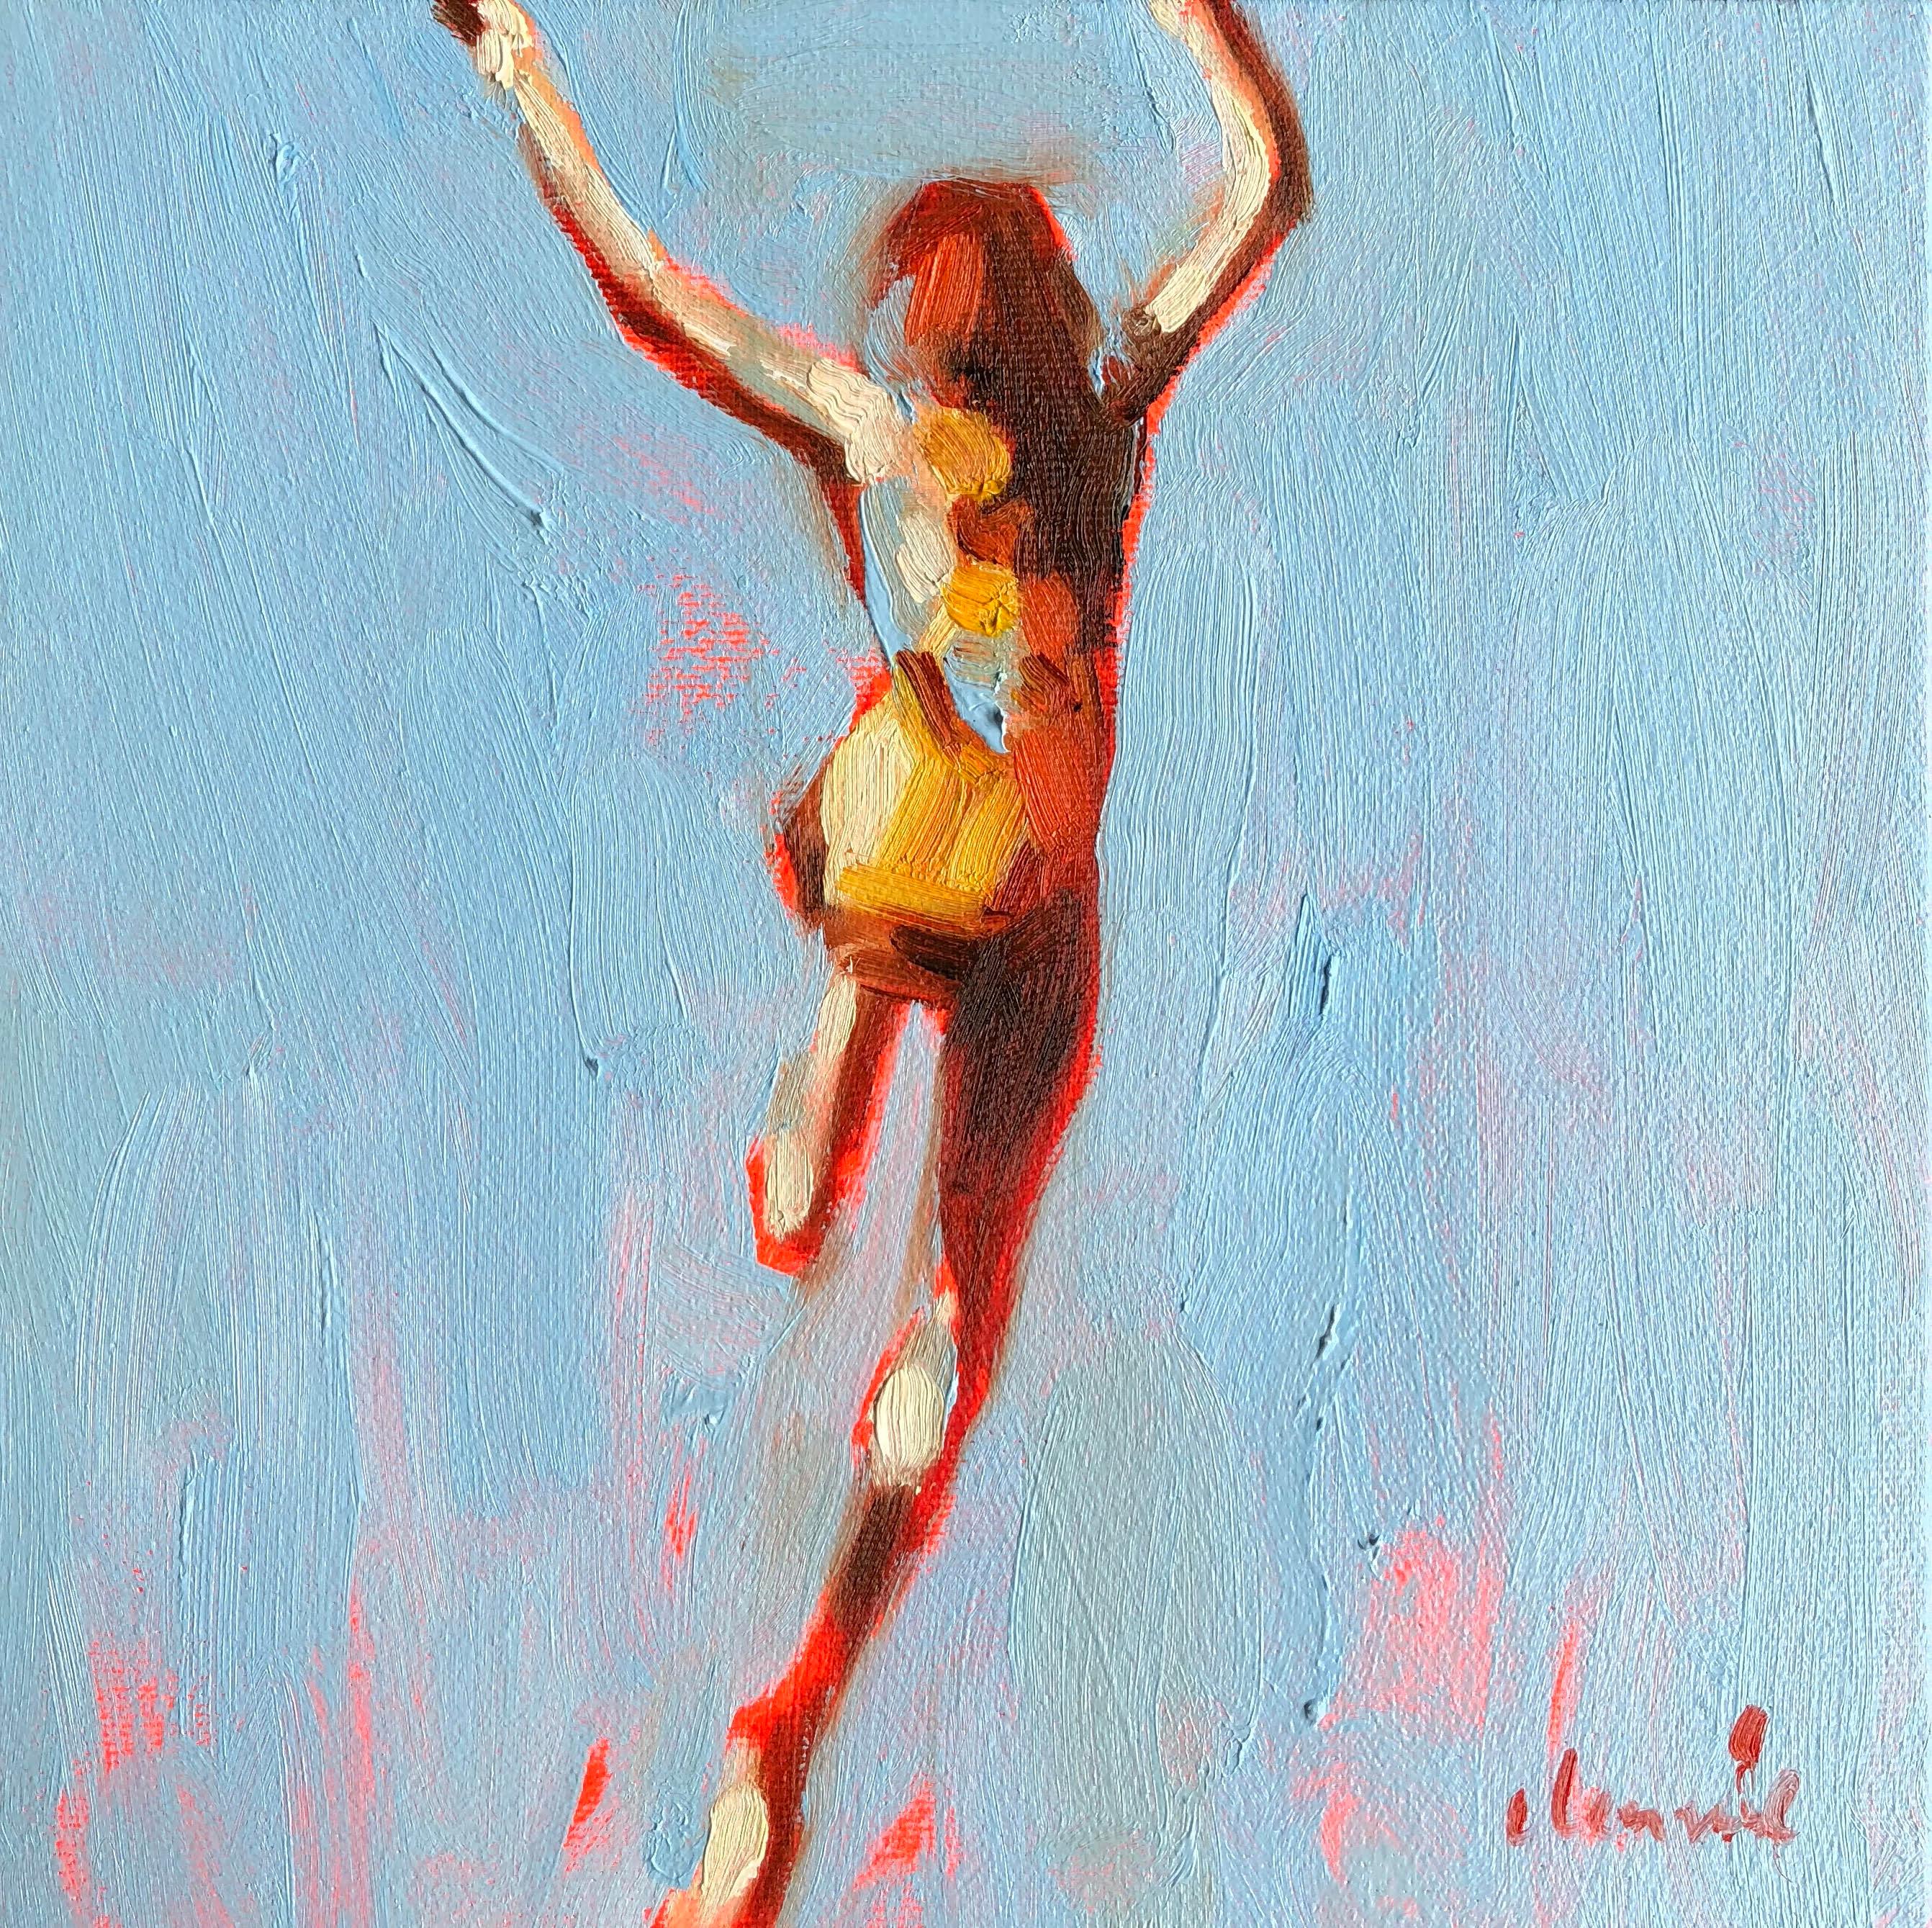 Elizabeth Lennie Figurative Painting - "Mythography #108" Abstract oil painting of a woman jumping in the water